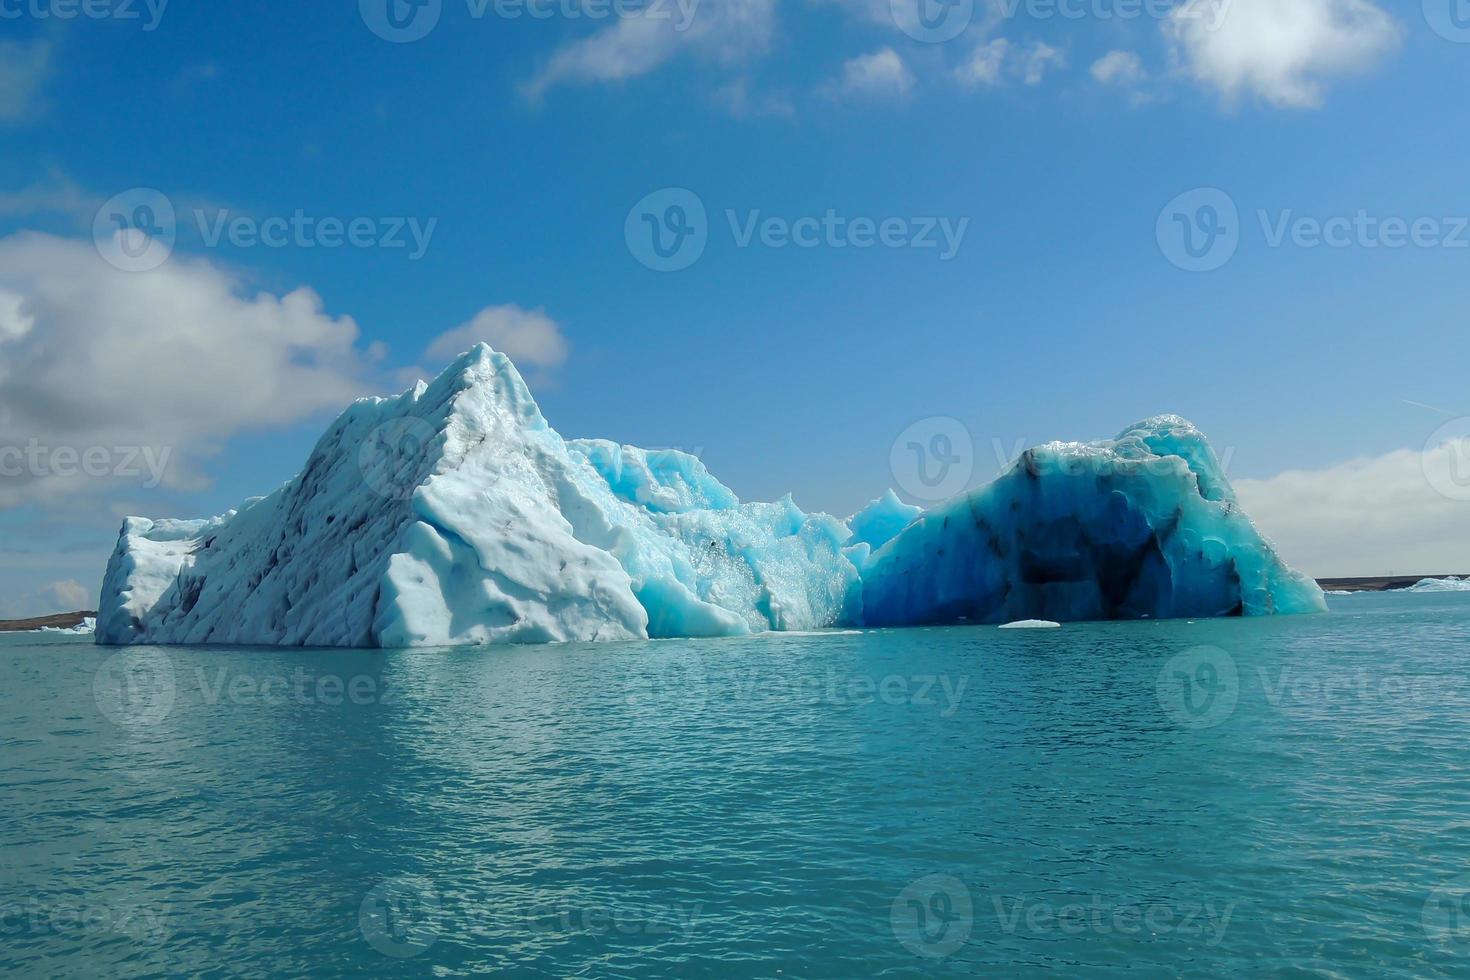 Turquoise bright blue iceberg floating in the North Sea blue cold water.JPG photo